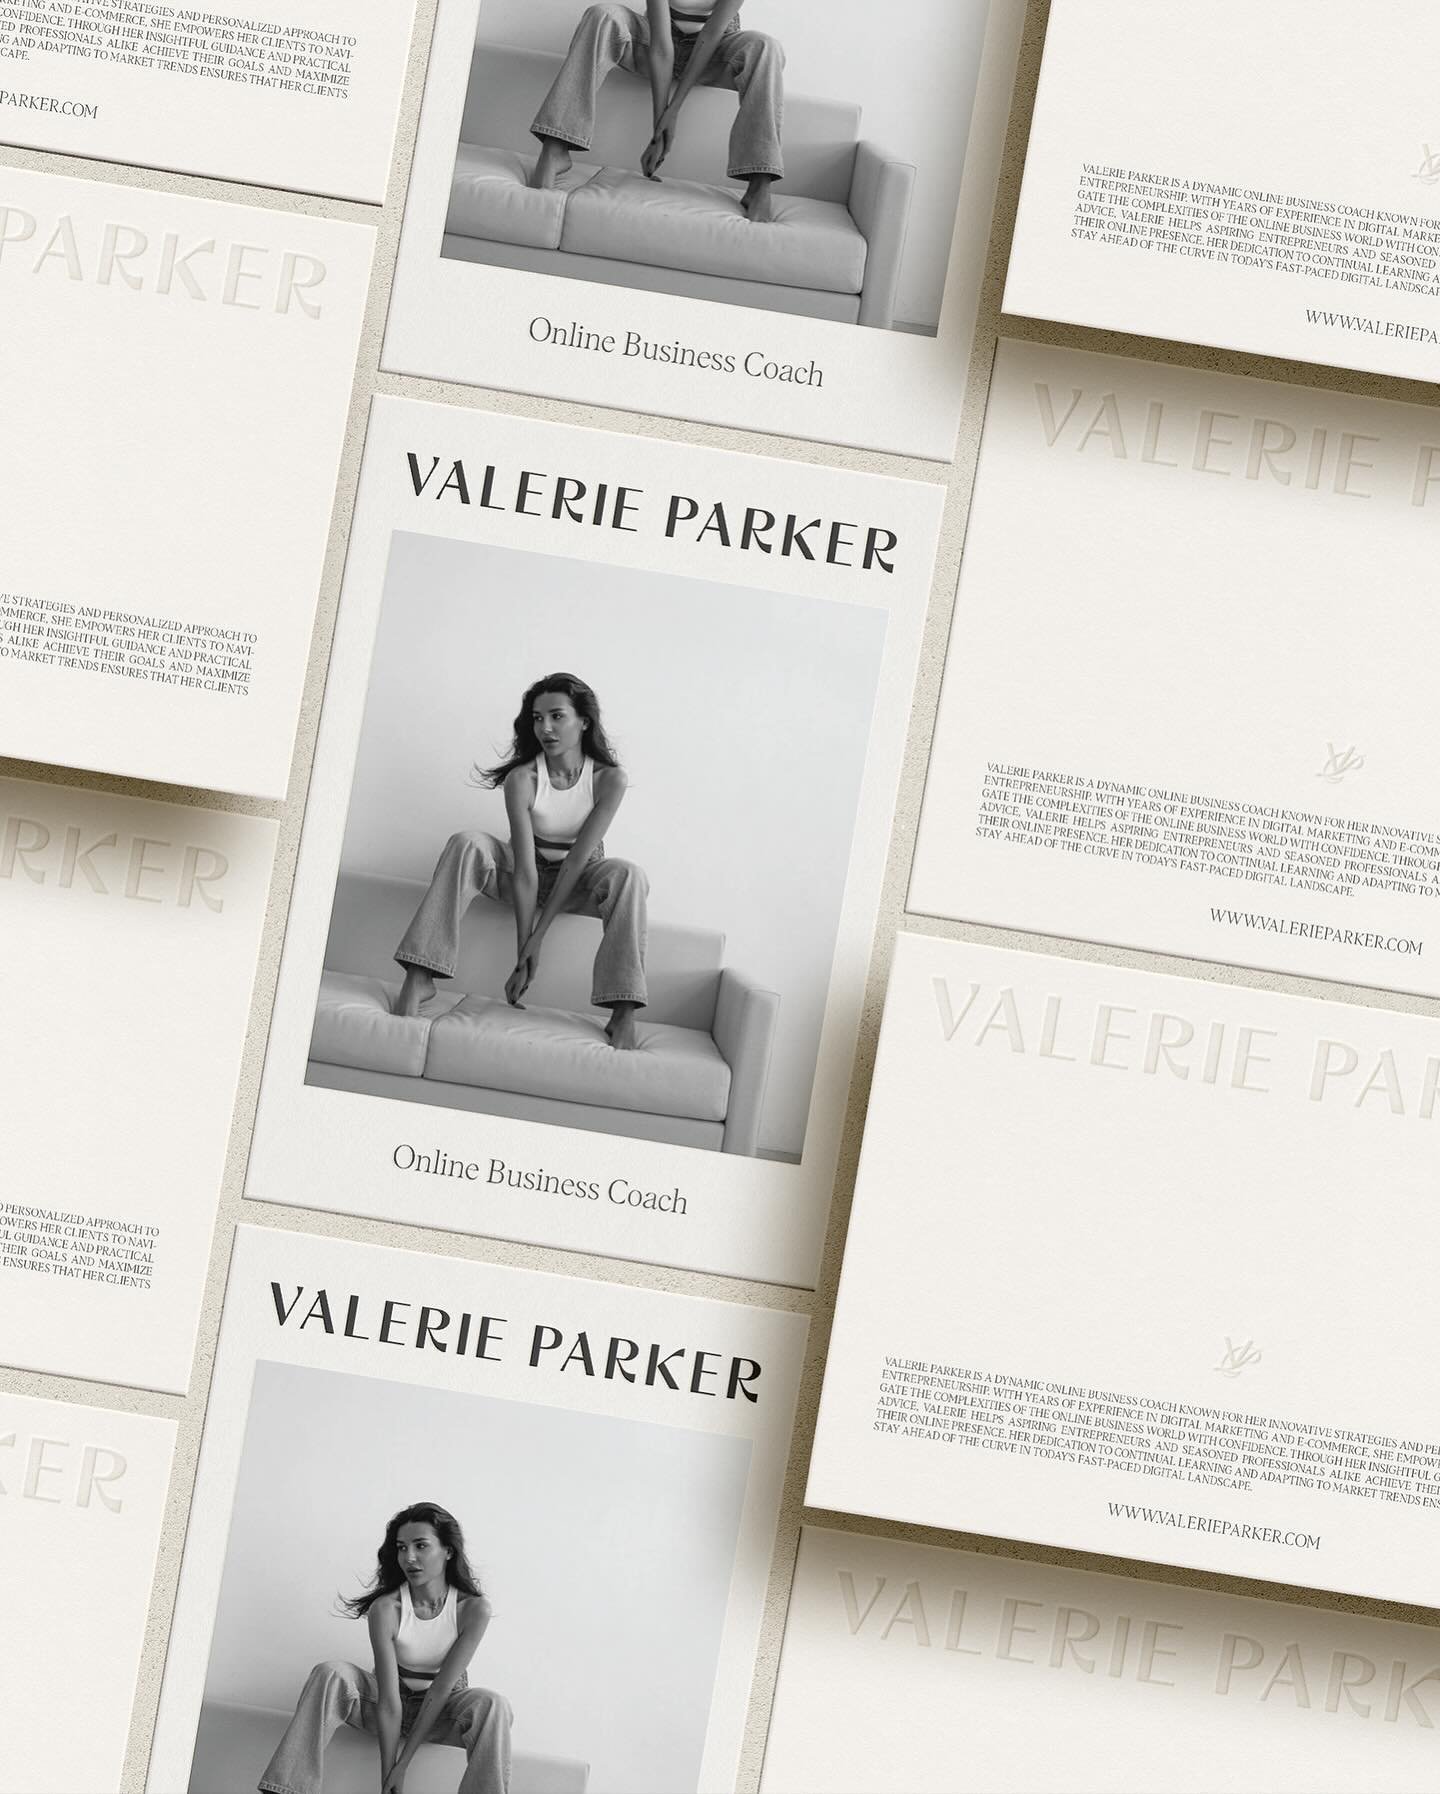 Valerie Parker&rsquo;s branding is sleek and sophisticated, featuring a neutral color palette and strong typography. The minimalist design reflects her focus on clarity and effectiveness in online business coaching. With clean lines and bold fonts, h